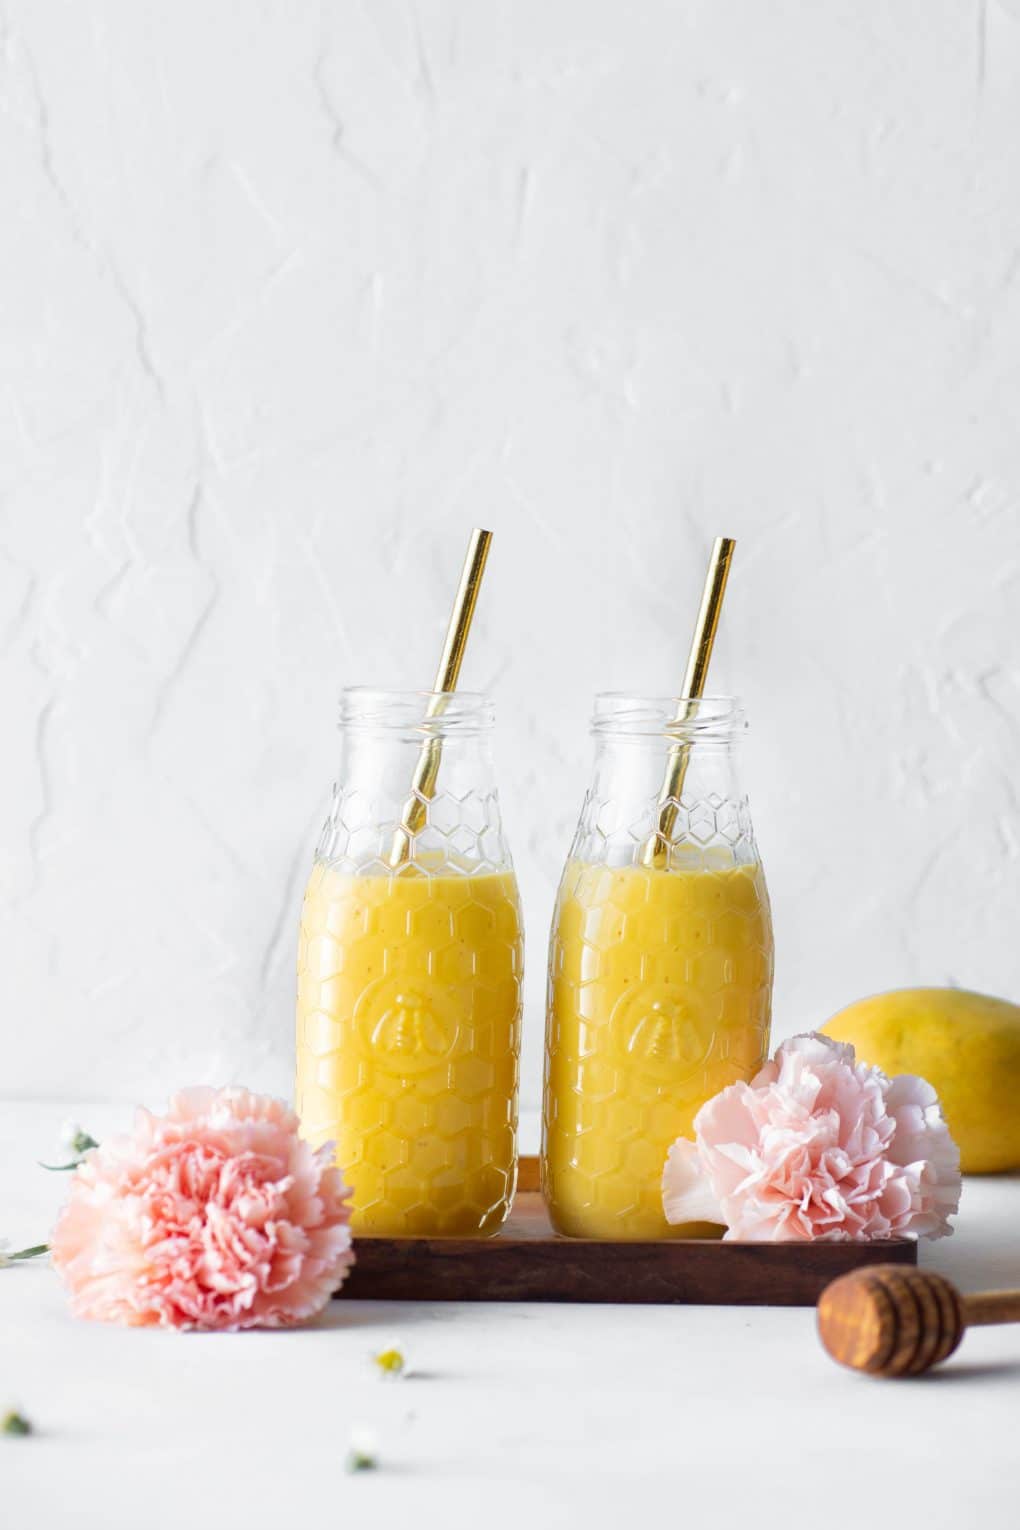 Far away side view of two bottles of a golden vegan mango lassi side by side on a small wooden platter surrounded by pink flowers against a white background